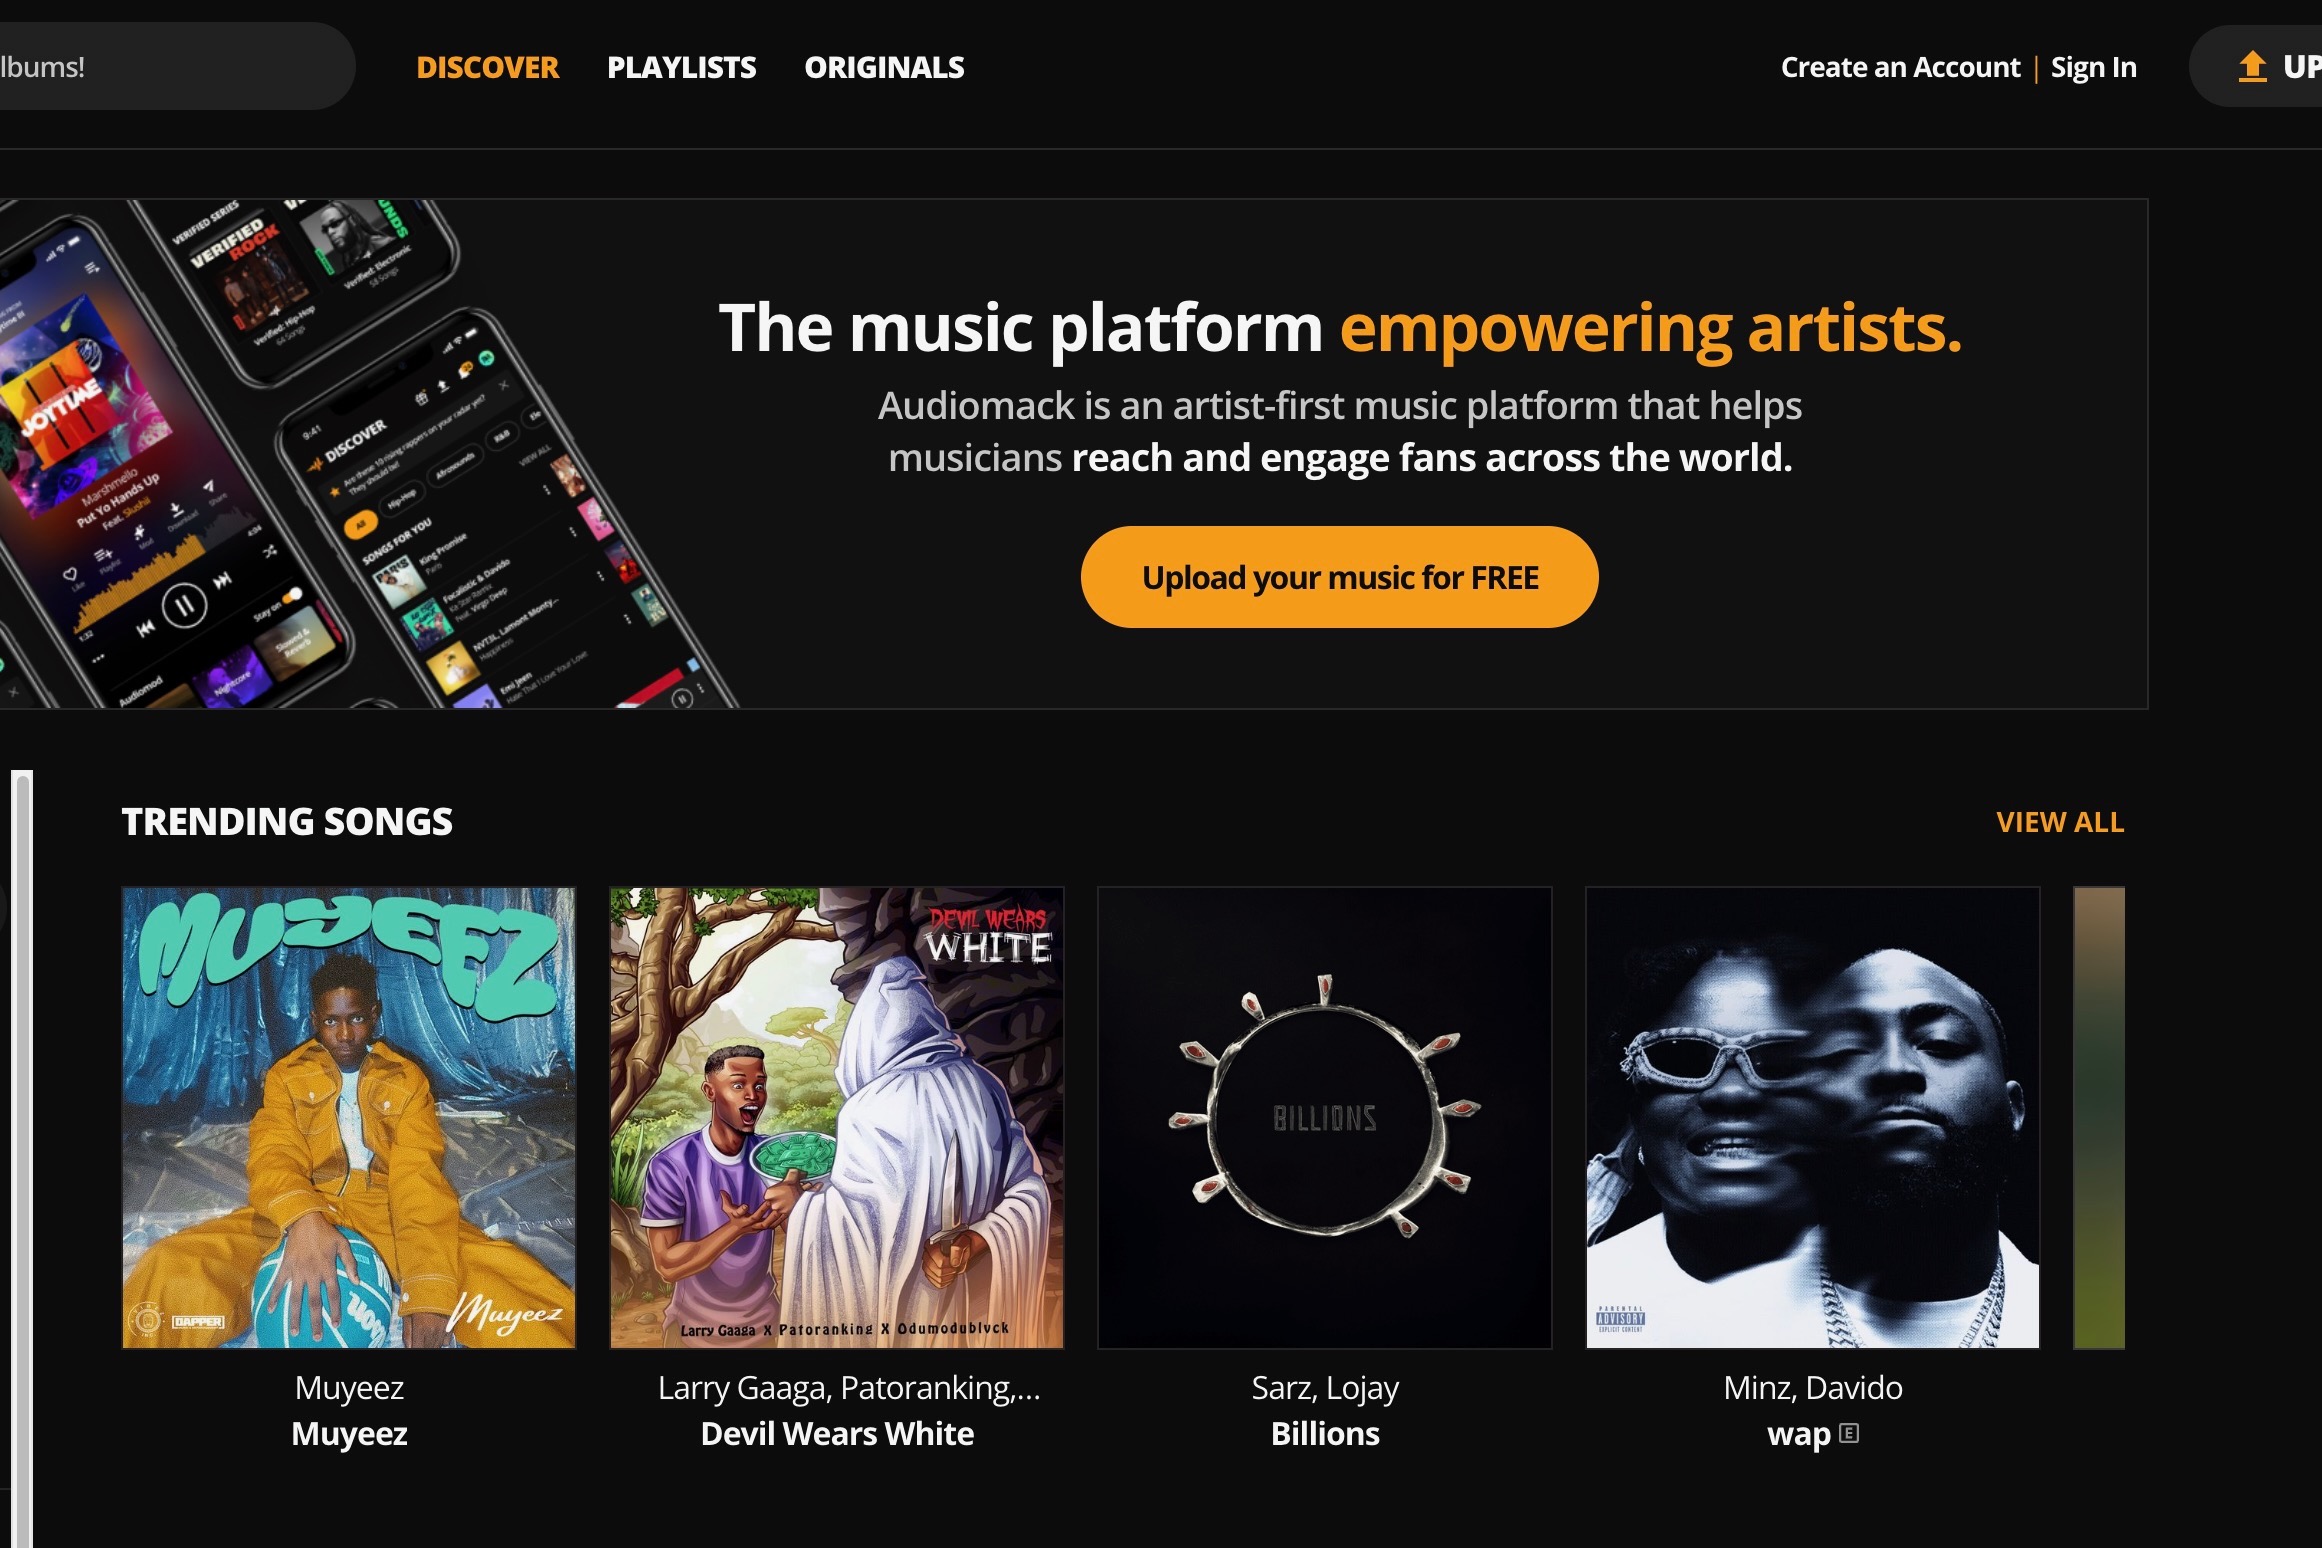 Tye home page of Audiomack.